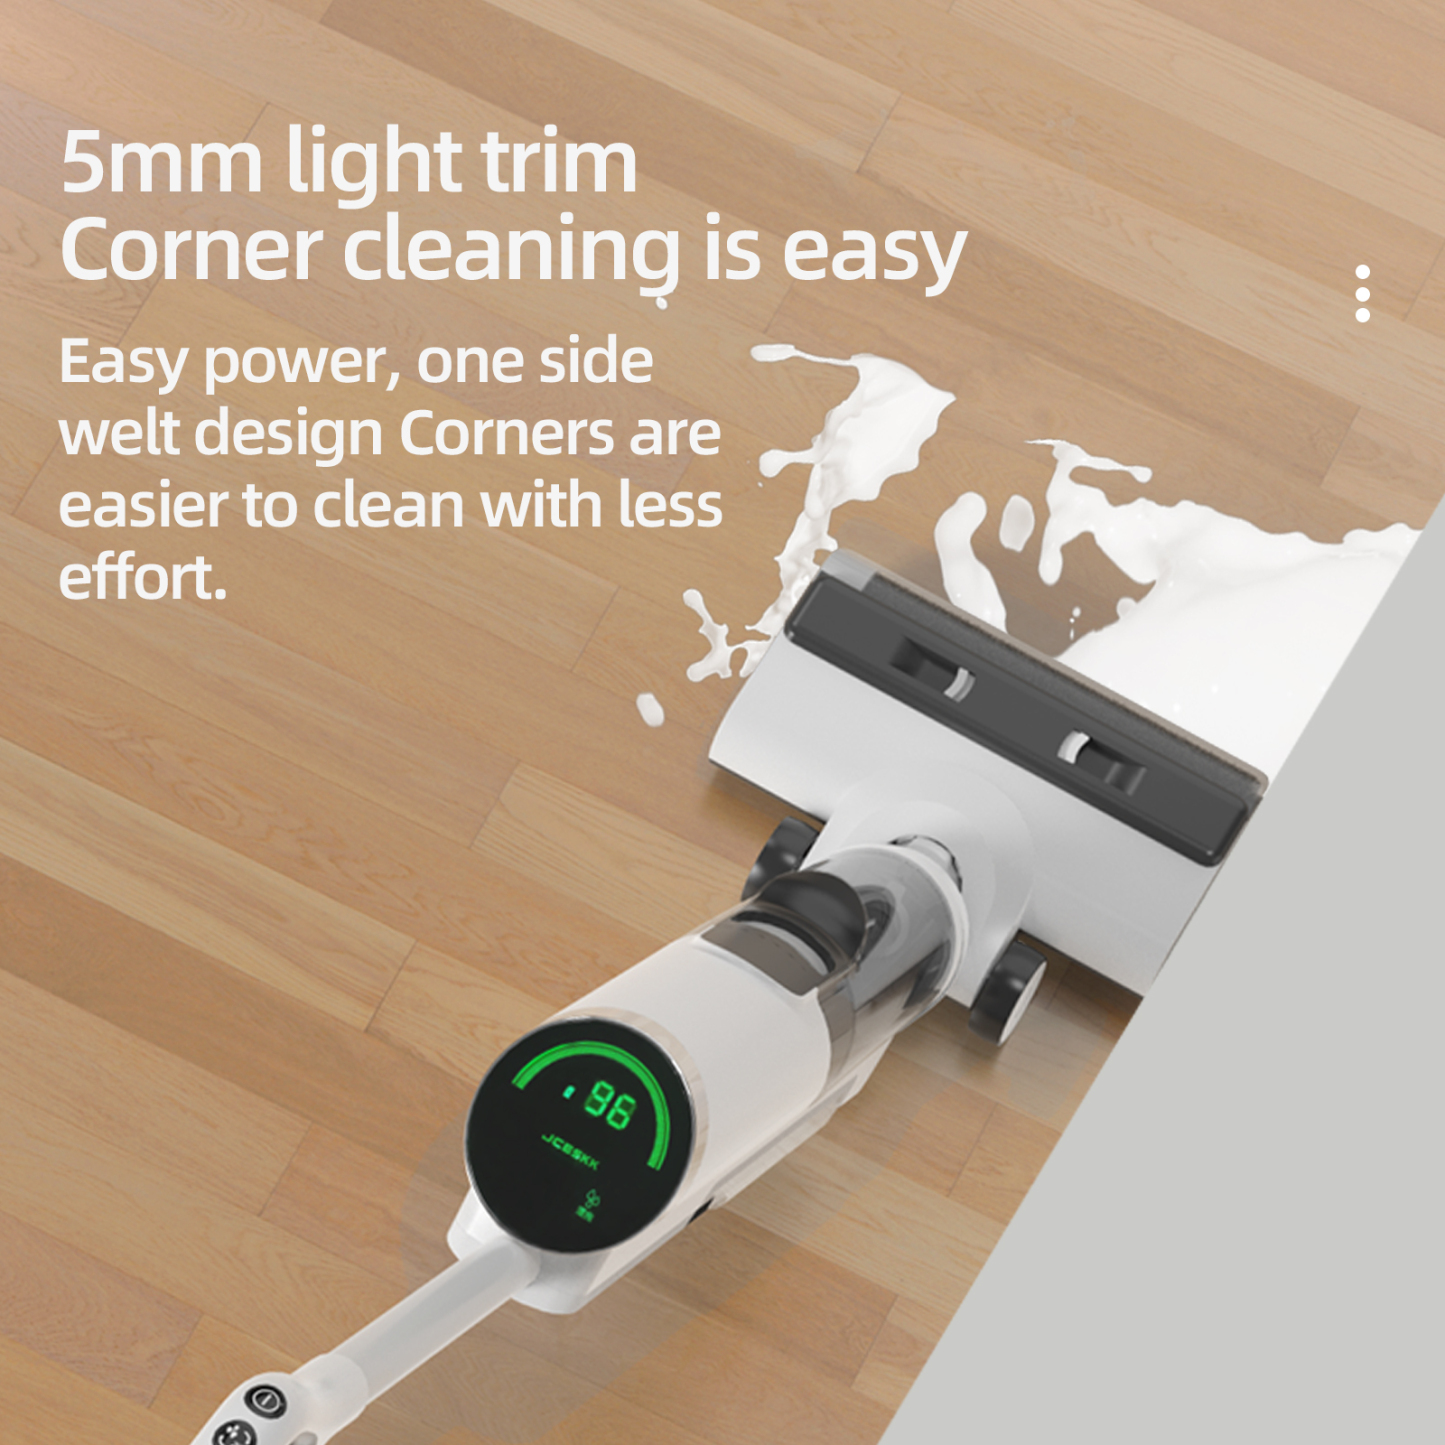 ZODA-D8 Wireless intelligent floor washer One-click self-cleaning and no hand washing PTC drying without odor Smart display/Voice